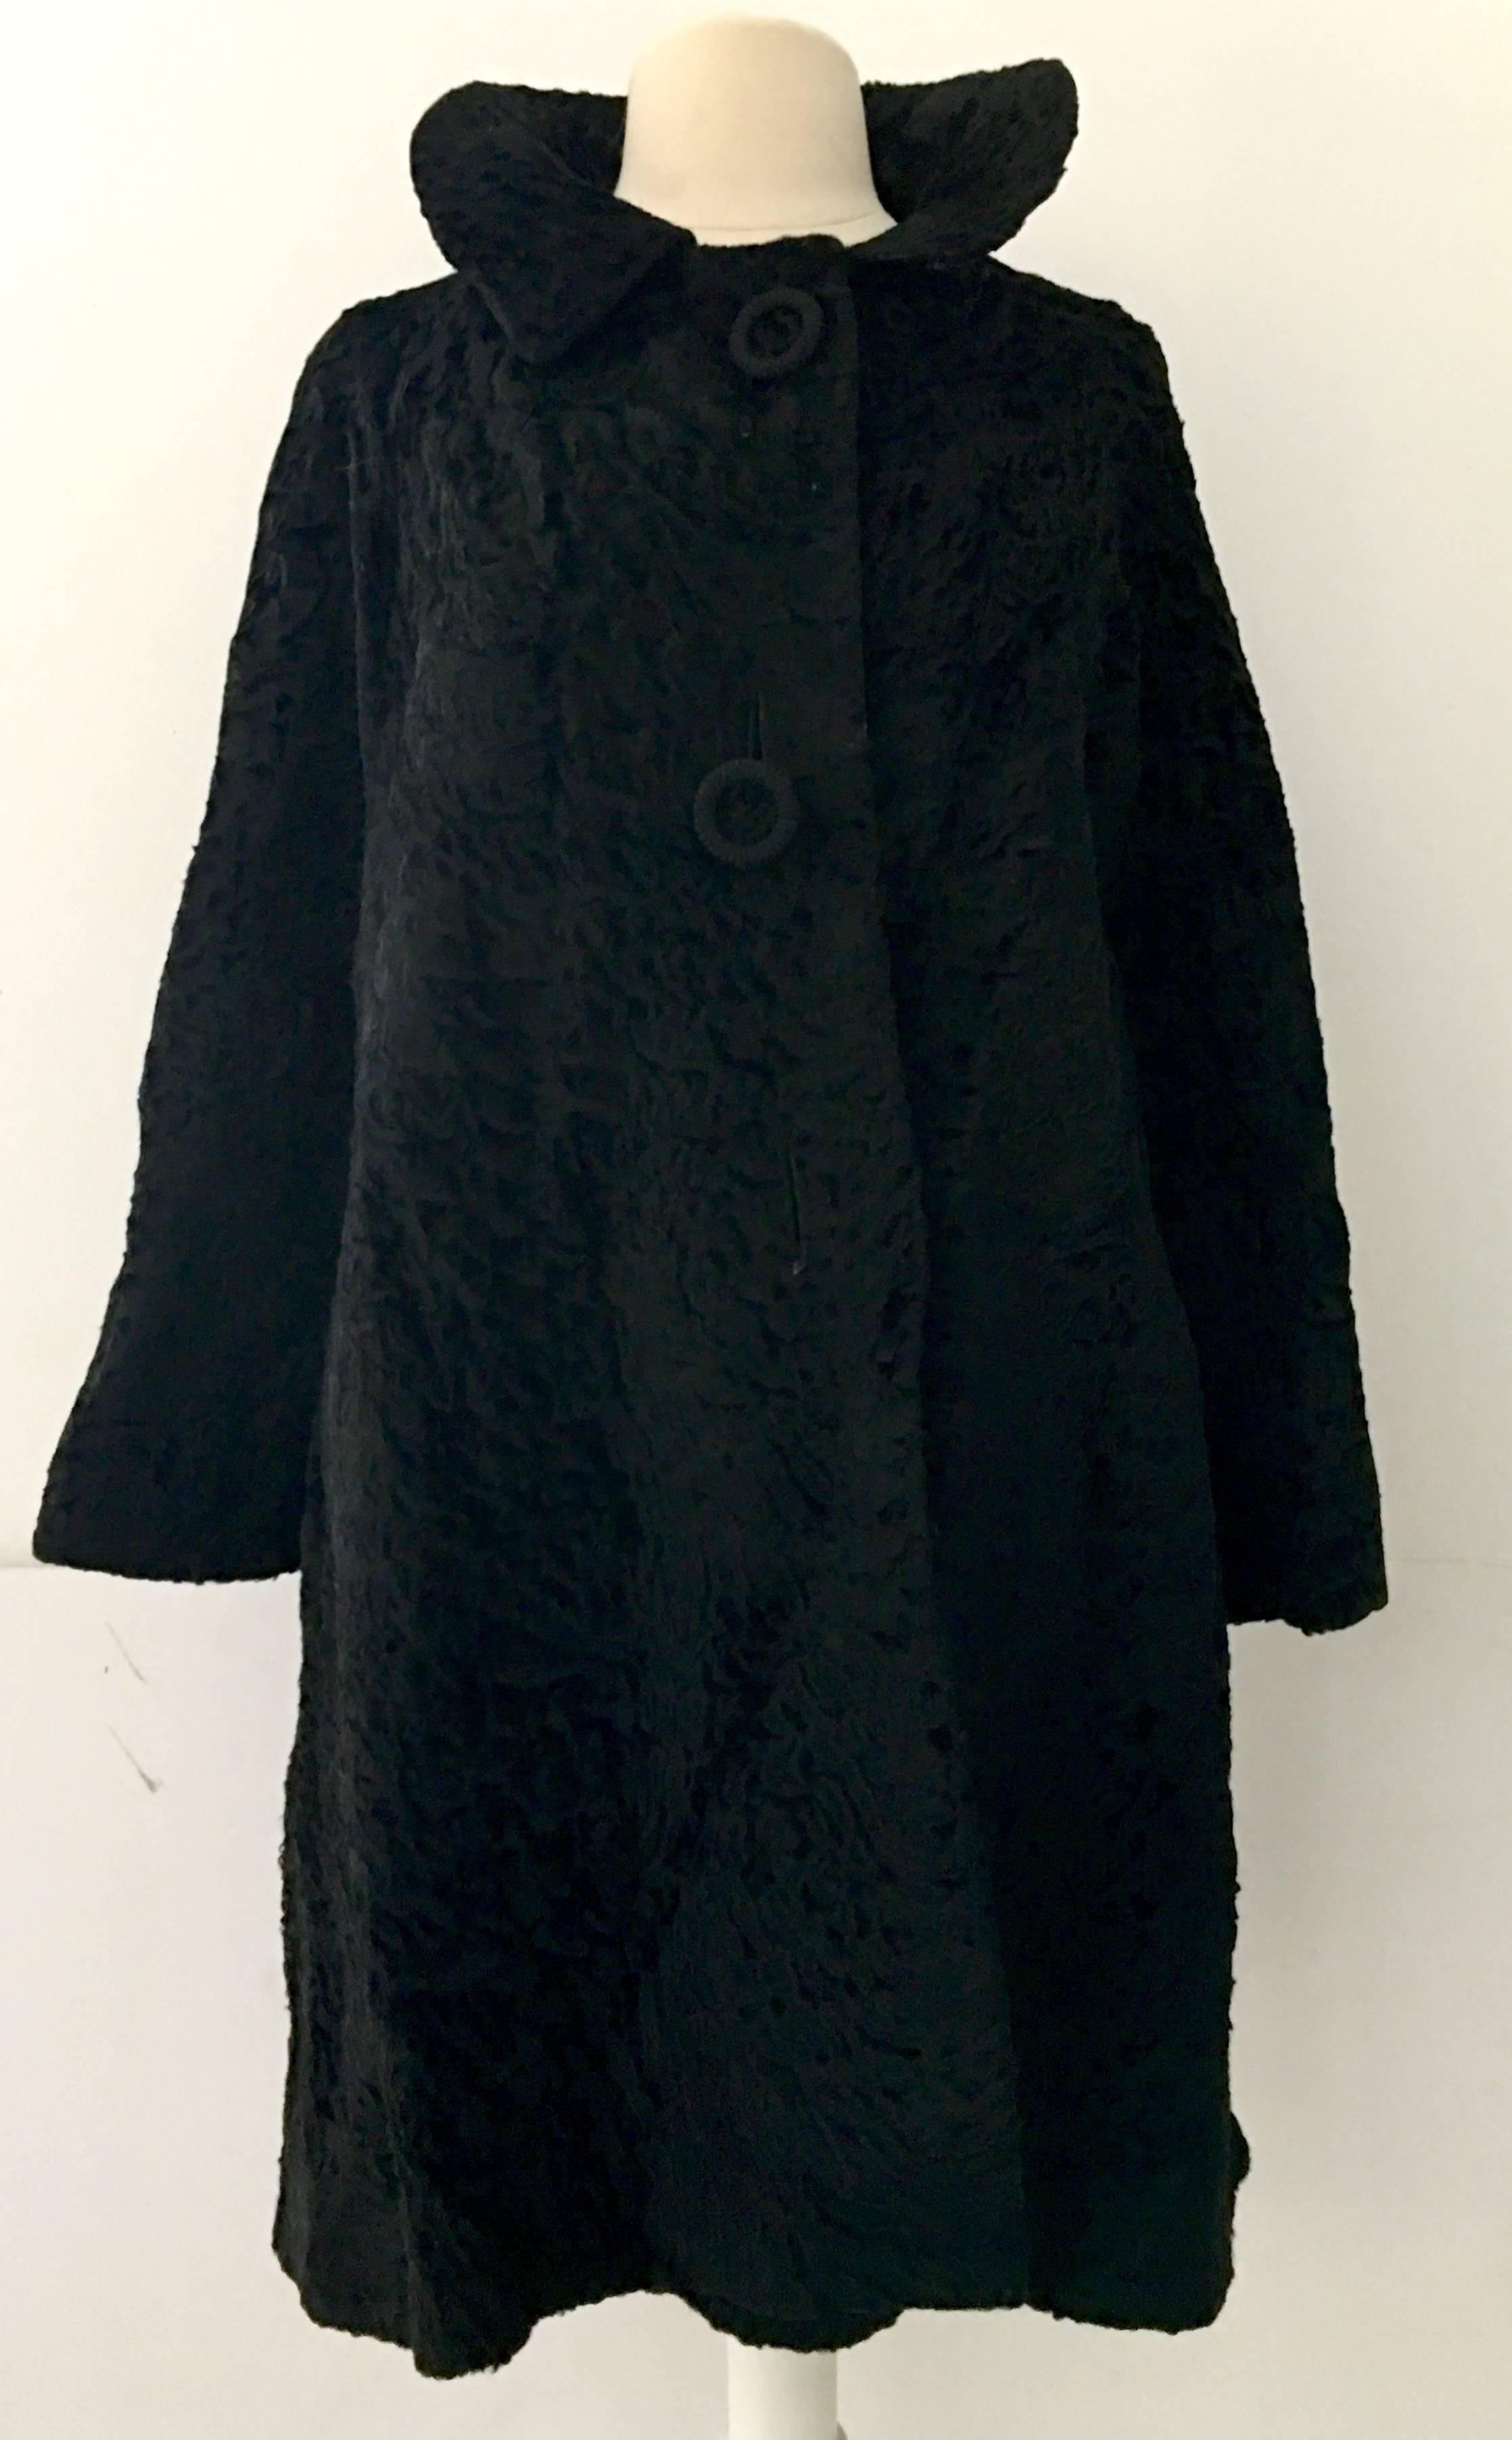 Vintage Black Persian Lamb Fur Swing Coat. Features a Peter Pan Collar, three quarter inch bell sleeves, oversized black Persian lamp buttons, two side pockets. Fully lined with original furrier tag in place, Thal's-Dayton Ohio.
Fits like a medium